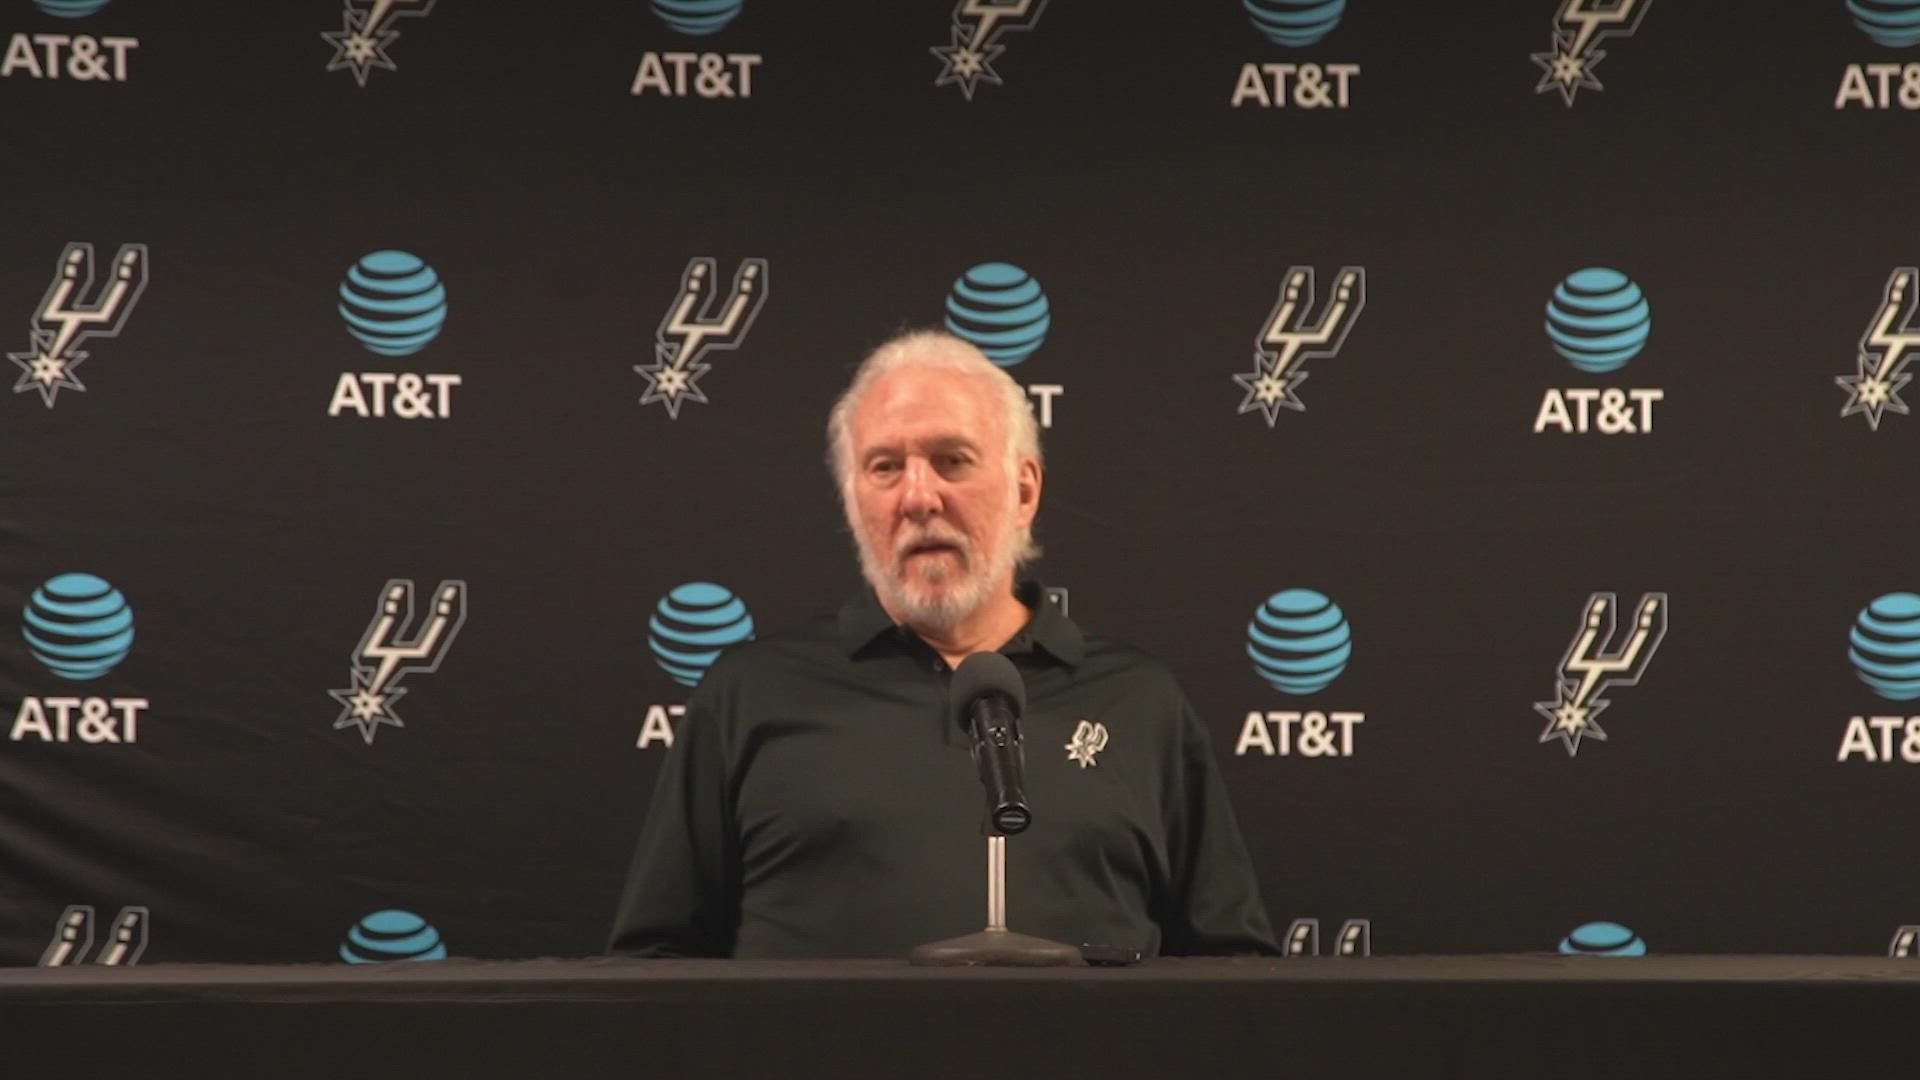 "Drew's gotten a lot more minutes than Thaddeus has, so I think that's probably the way we've pretty much pictured it," Popovich said.